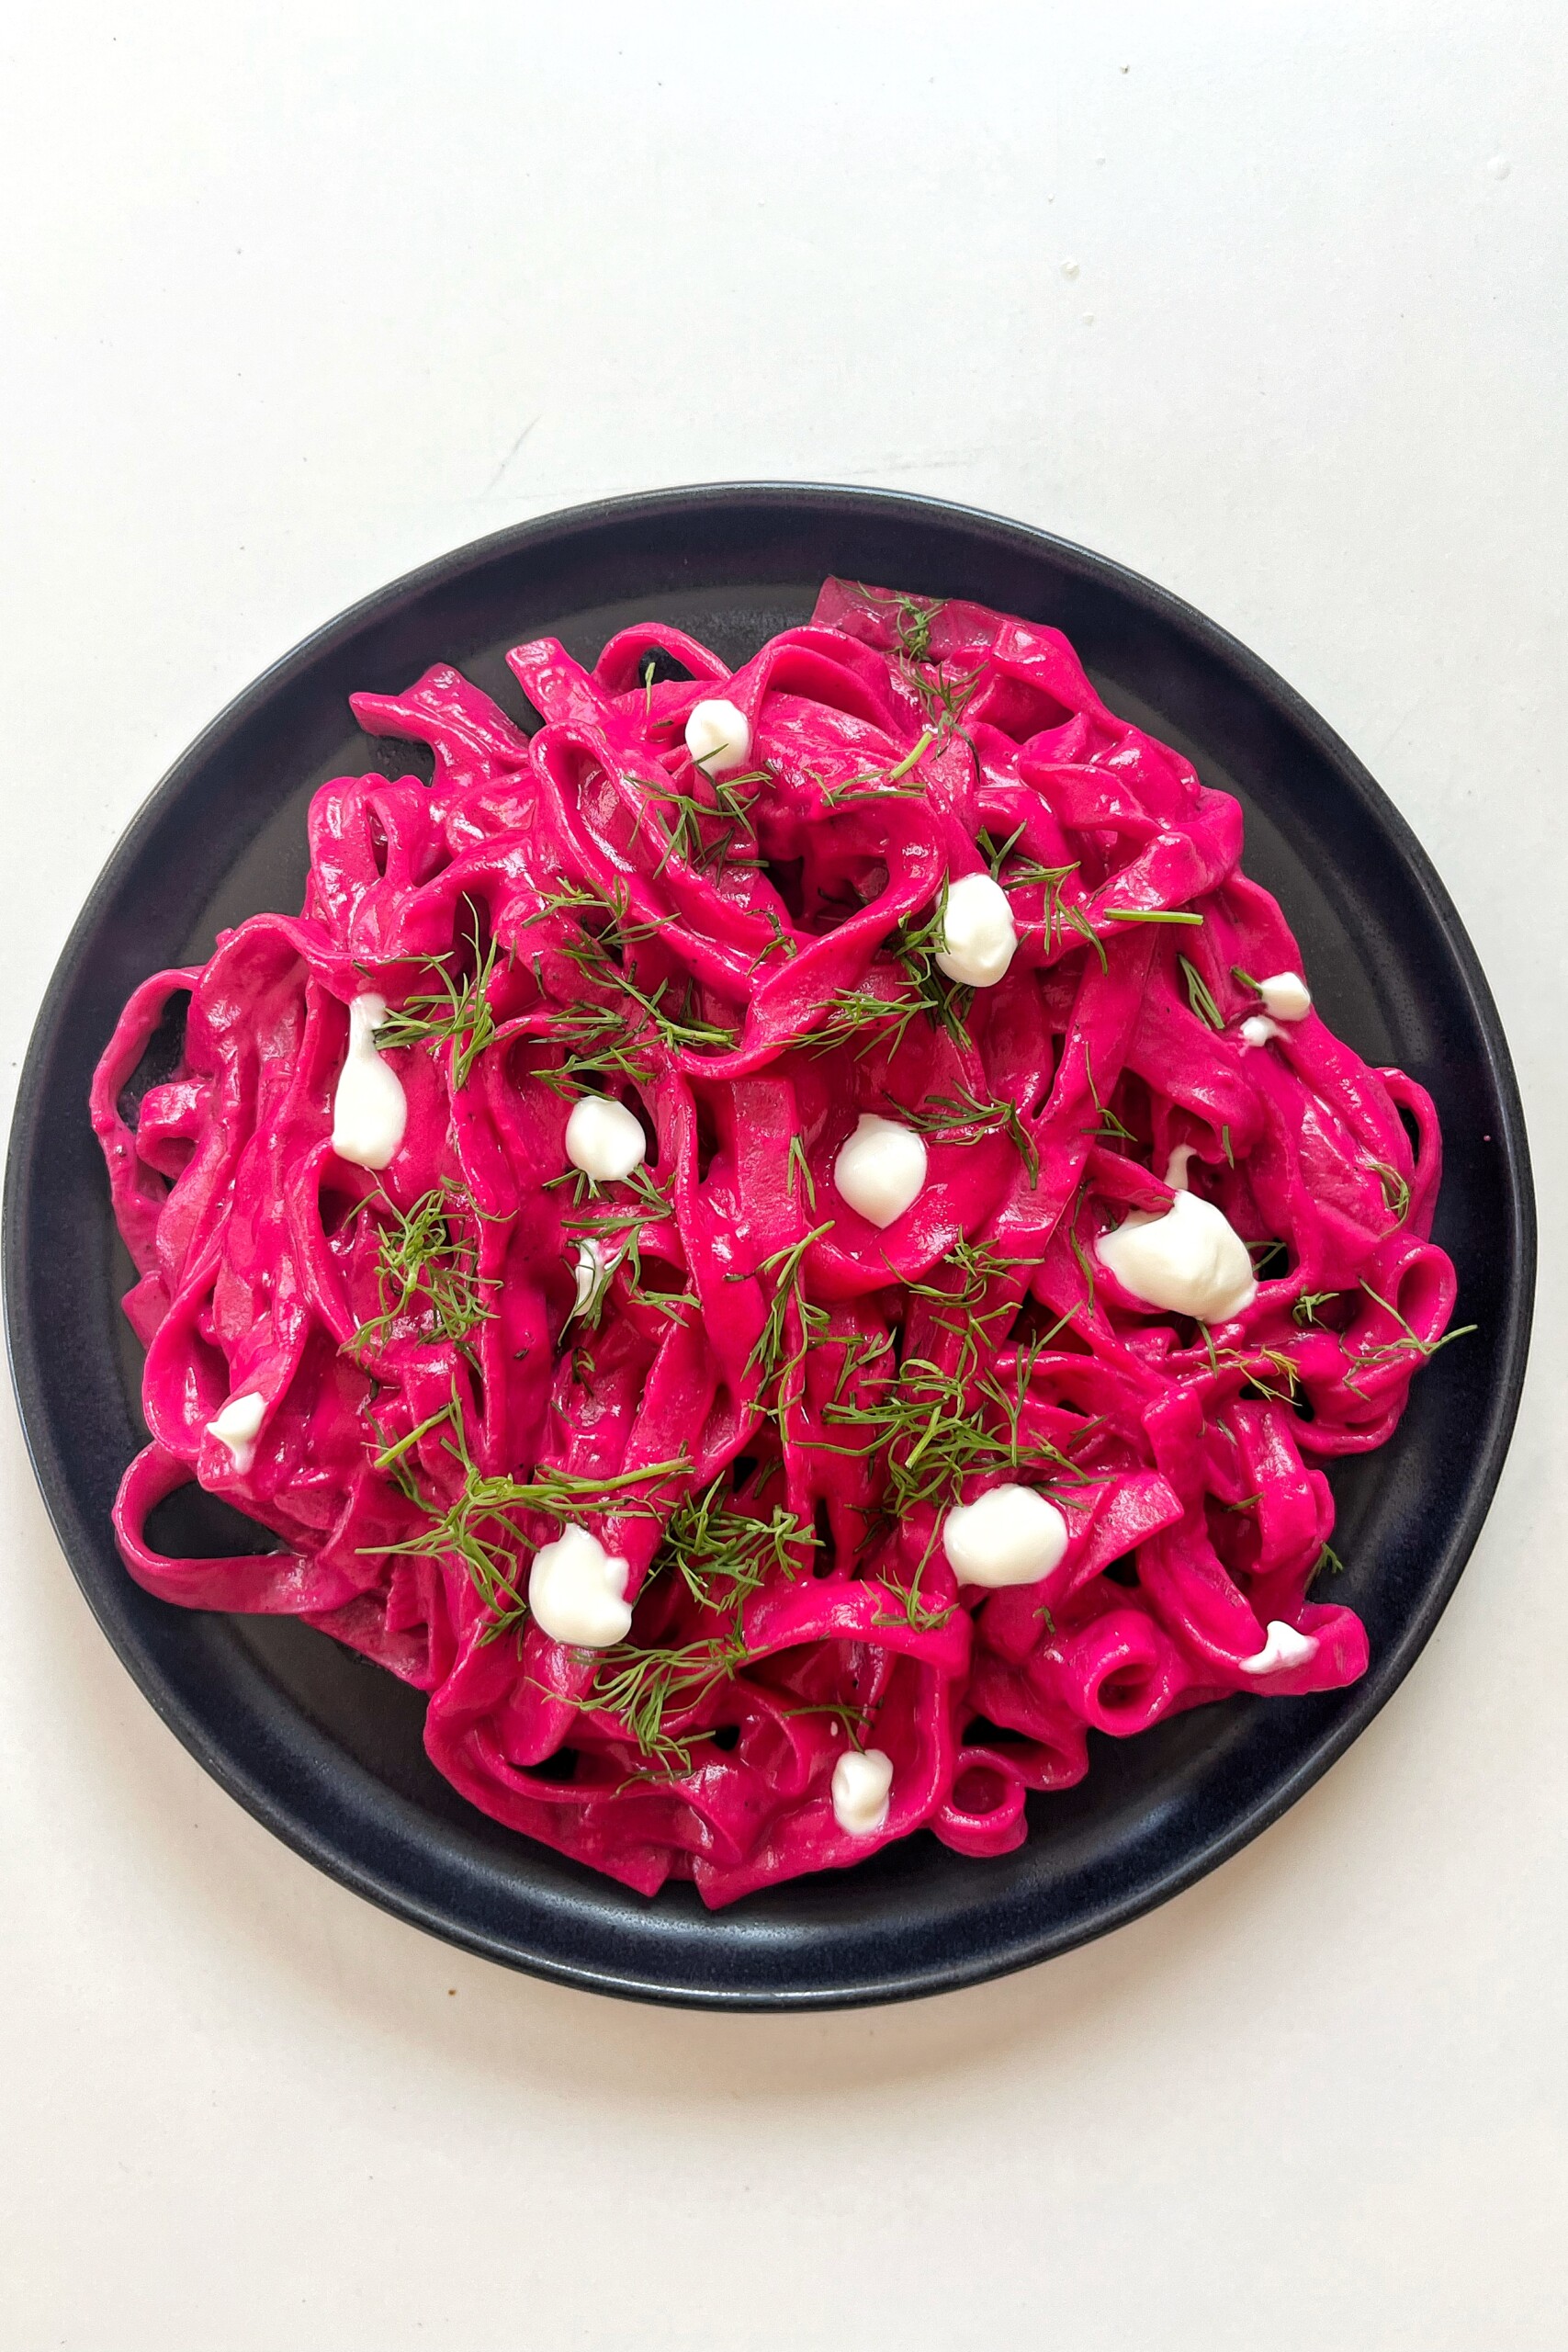 Pink pasta on a black plate.